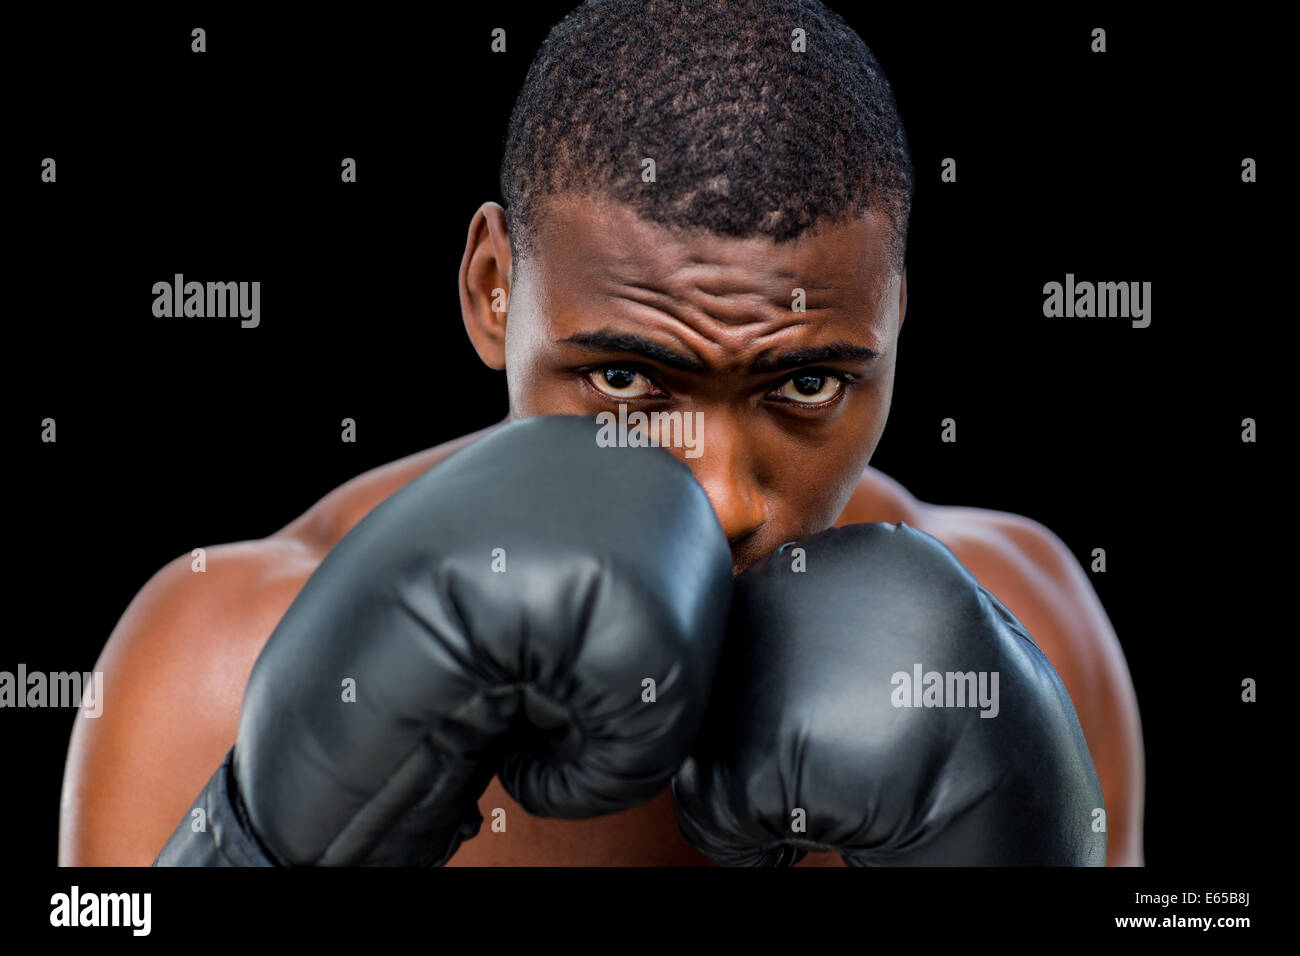 Portrait of a shirtless muscular boxer in defensive stance Stock Photo